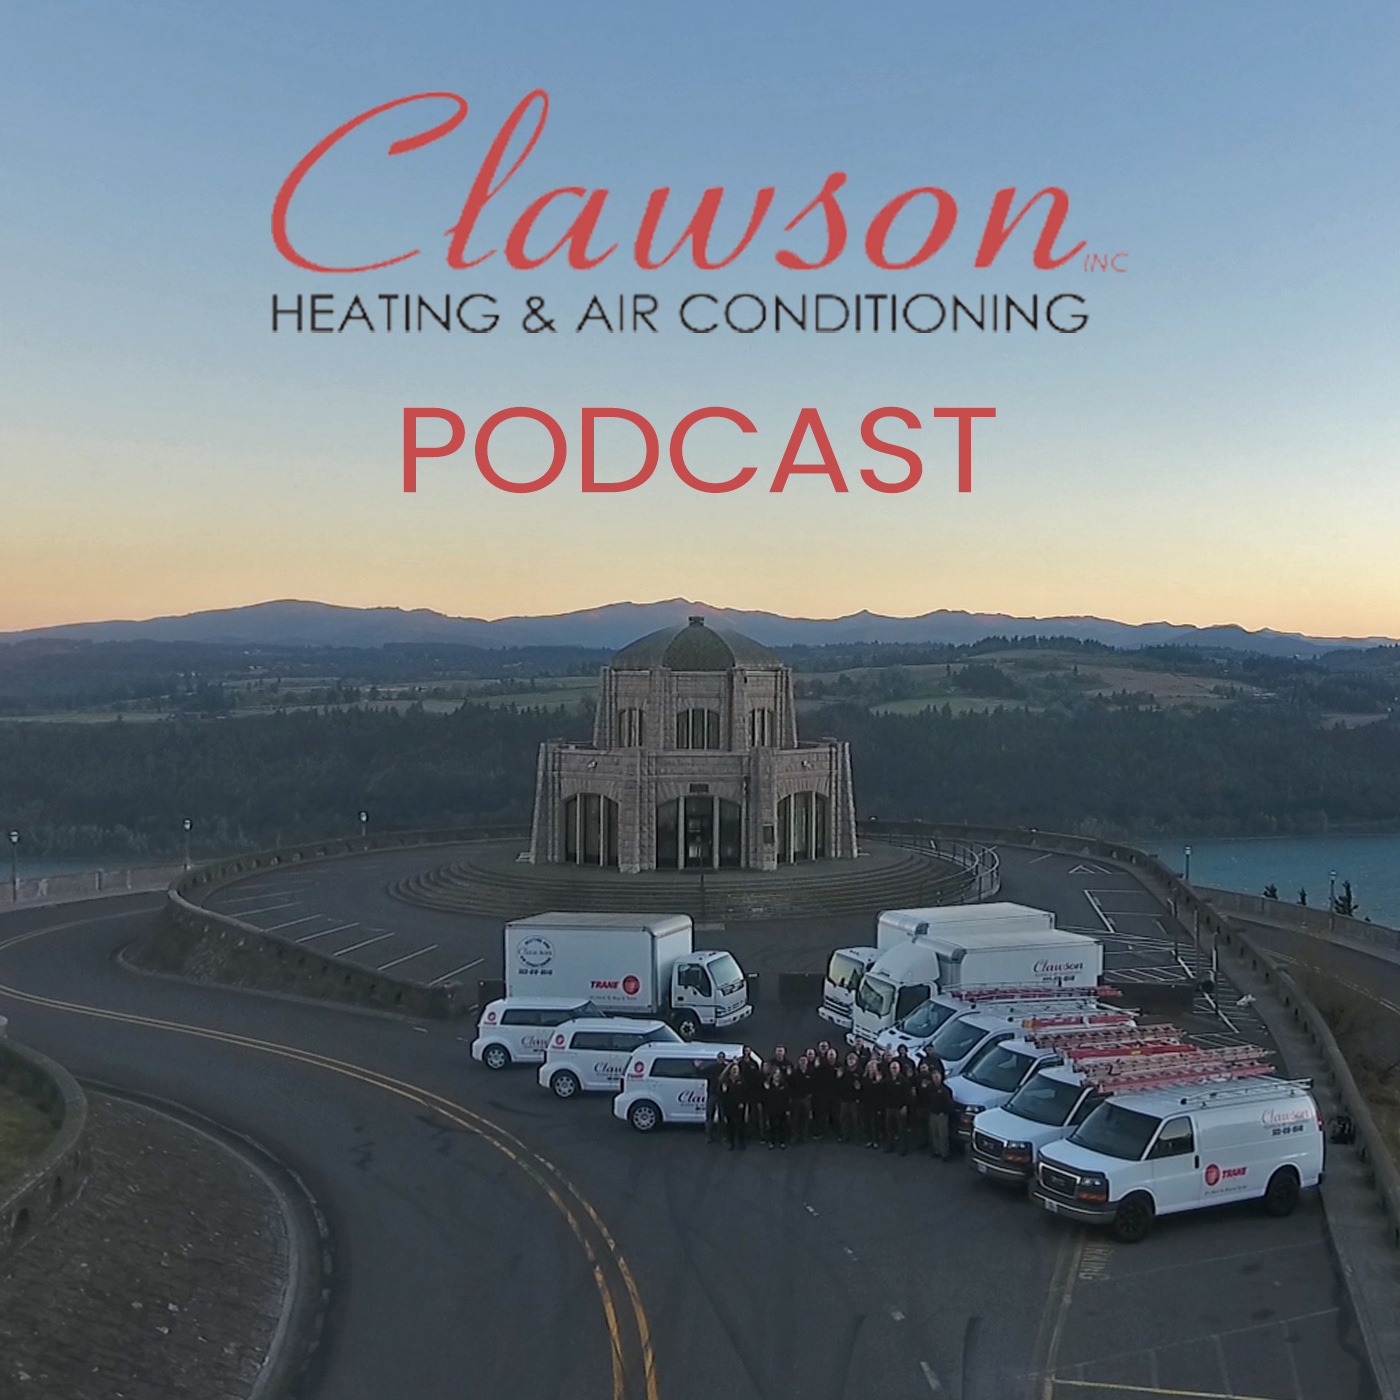 Clawson Heating & Air Conditioning Podcast